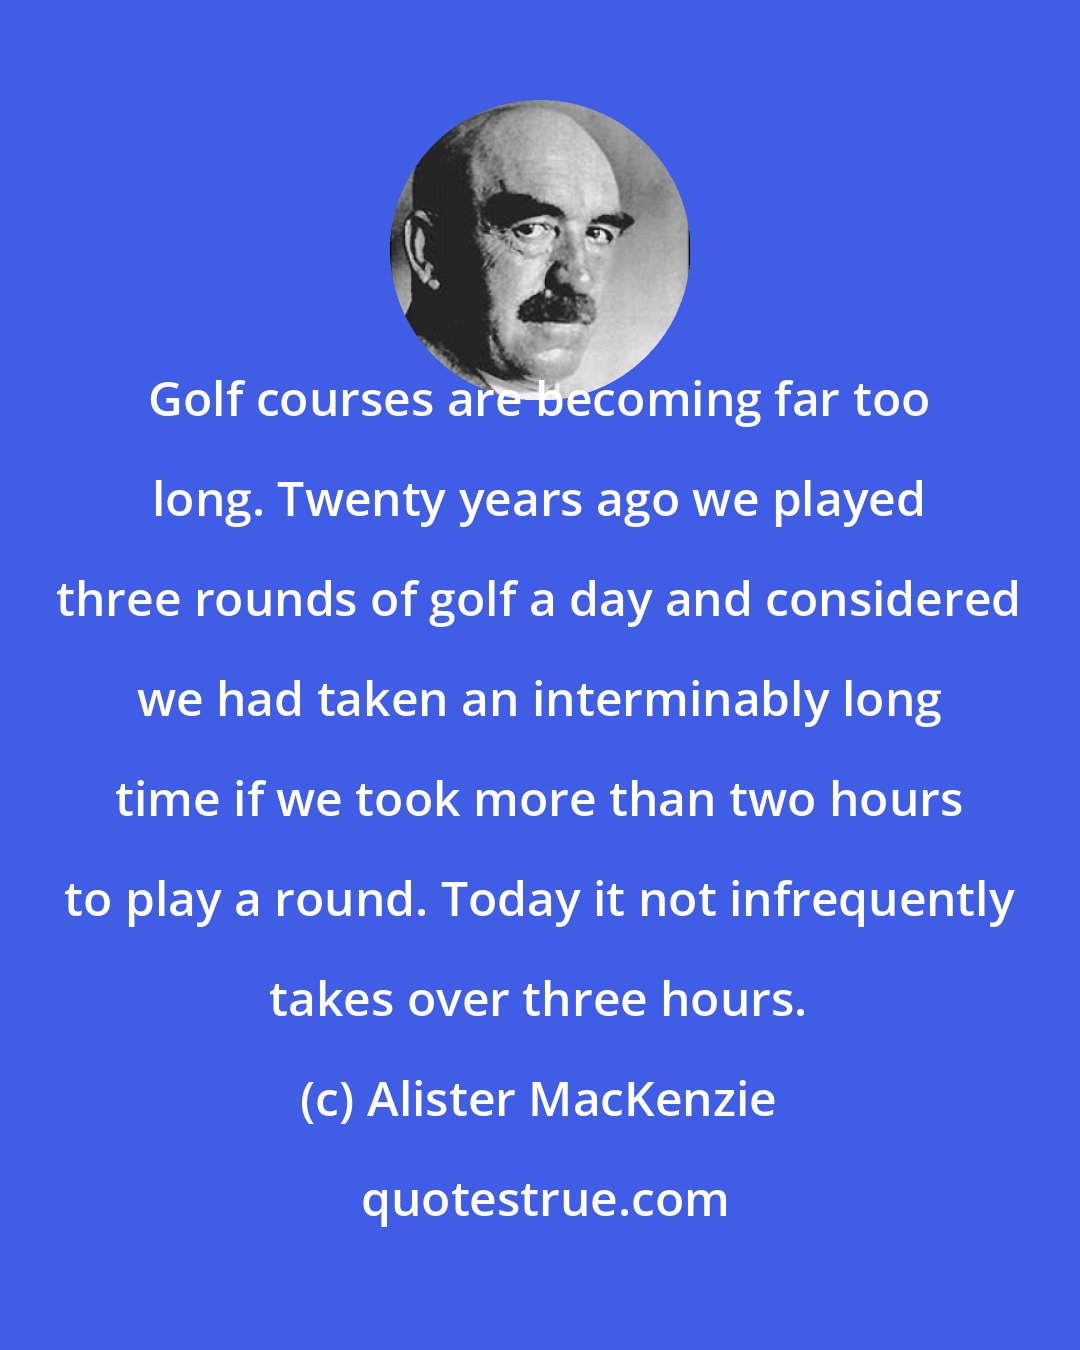 Alister MacKenzie: Golf courses are becoming far too long. Twenty years ago we played three rounds of golf a day and considered we had taken an interminably long time if we took more than two hours to play a round. Today it not infrequently takes over three hours.